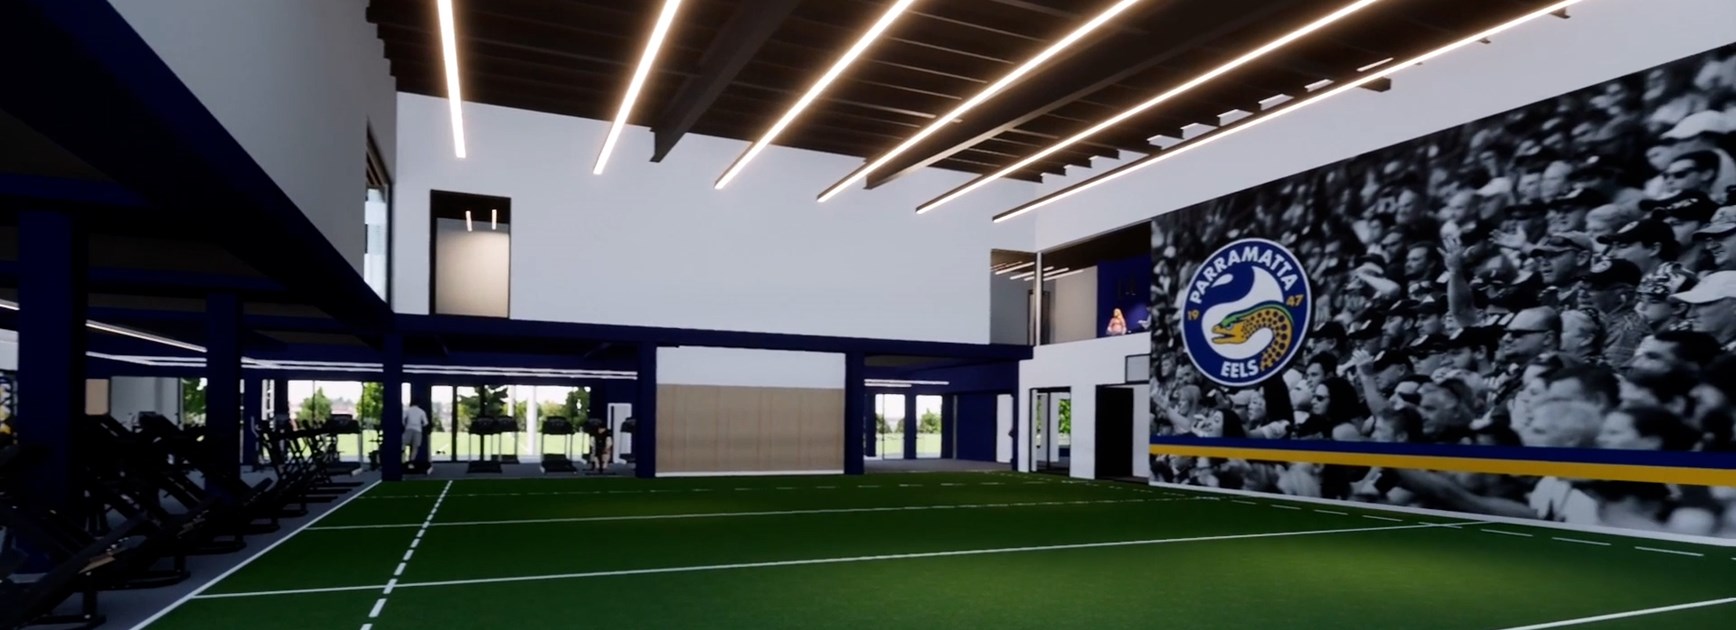 Parramatta Eels appoint Kane Constructions NSW to build Centre of Excellence